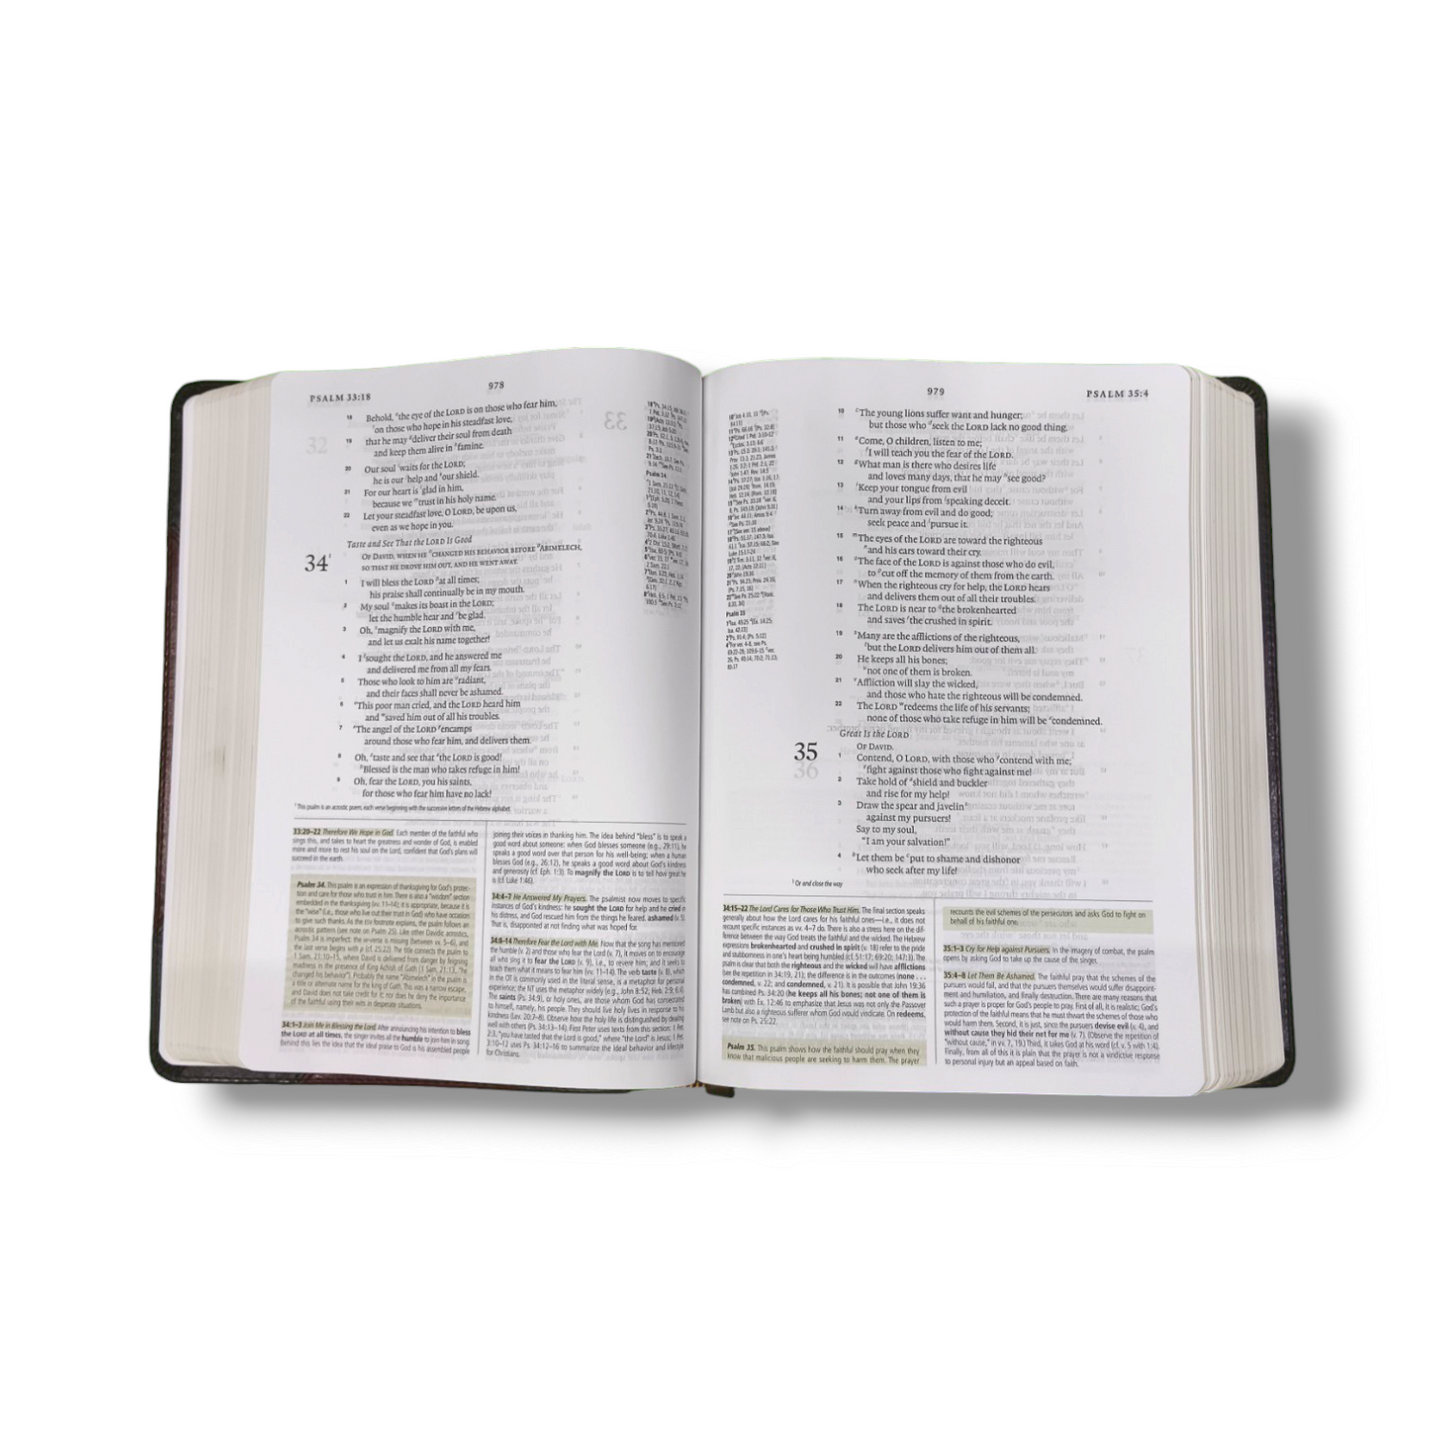 ESV Study Bible | Complete Reference System | Study Bible | Brown Leather Cover Edition | Personal Reference | With Related Pictures | New Edition